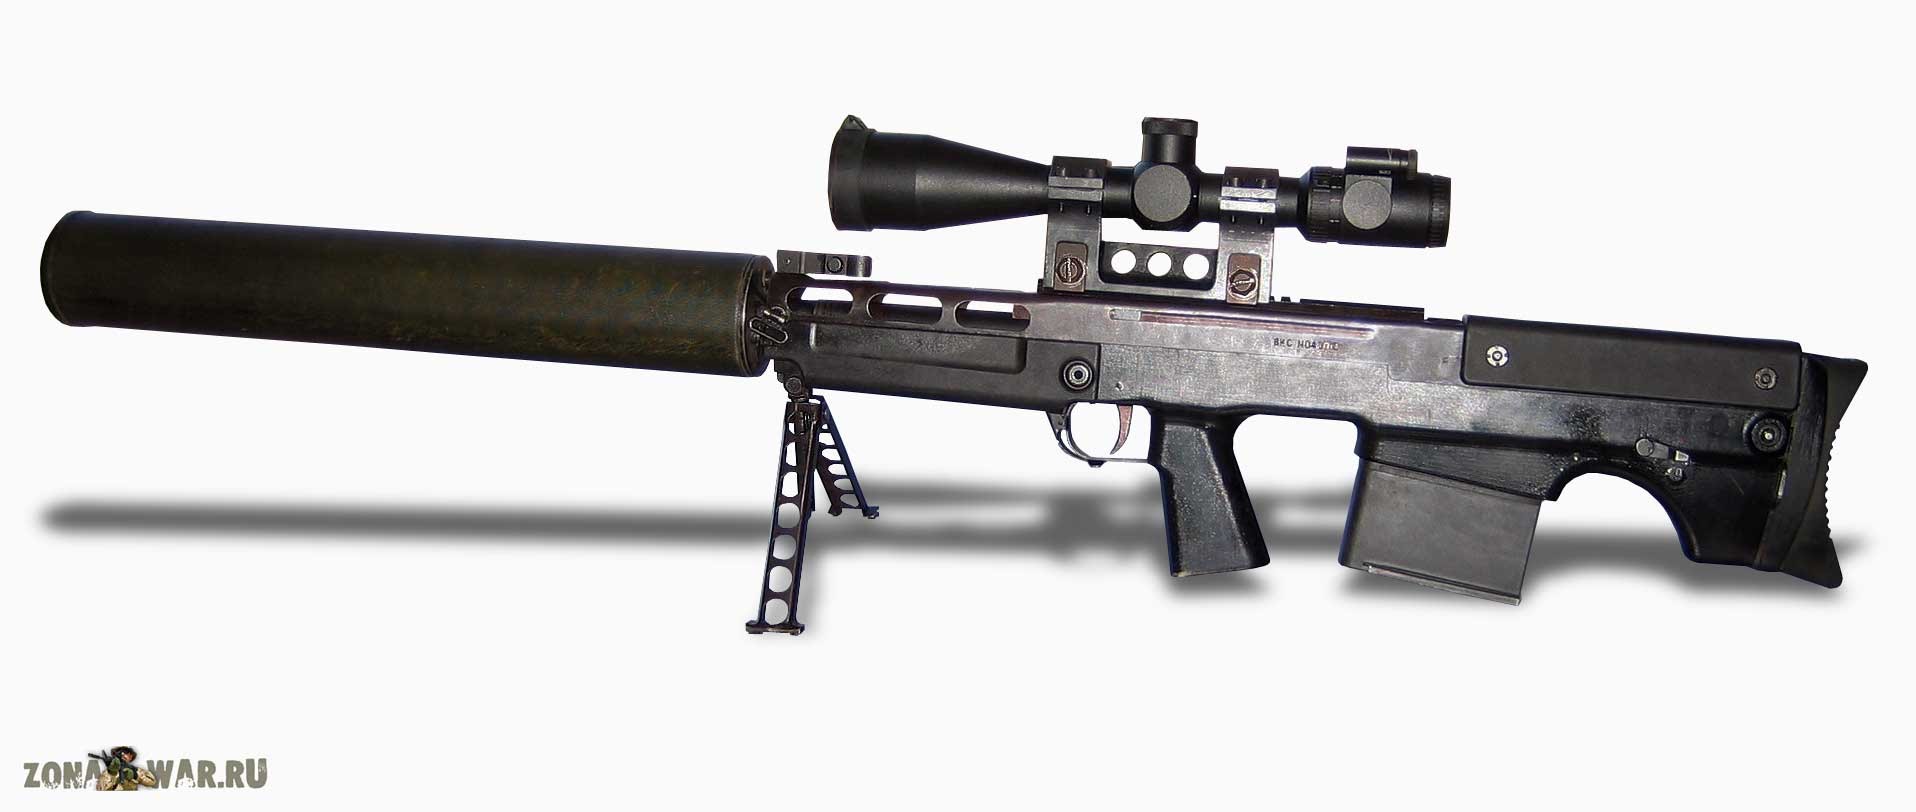 Sniper Rifle Backgrounds, Compatible - PC, Mobile, Gadgets| 1916x812 px